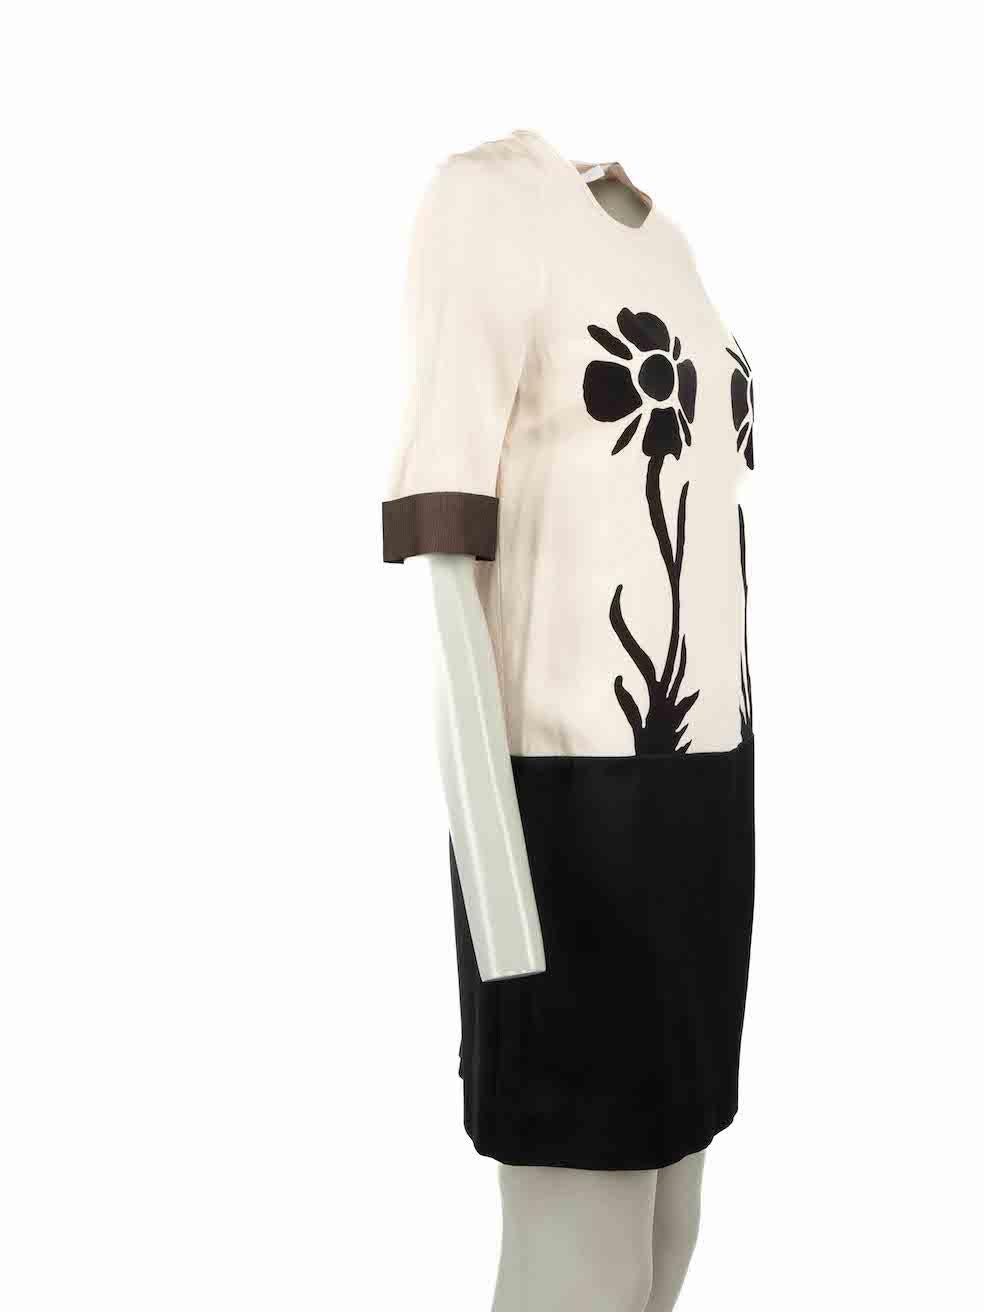 CONDITION is Very good. Minimal wear to dress is evident. Pluck to the weave of the front skirt on this used Victoria Victoria Beckham designer resale item.

Details
Beige
Synthetic
Dress
Black floral appliqu√©
Knee length
Round neck
Back zip and